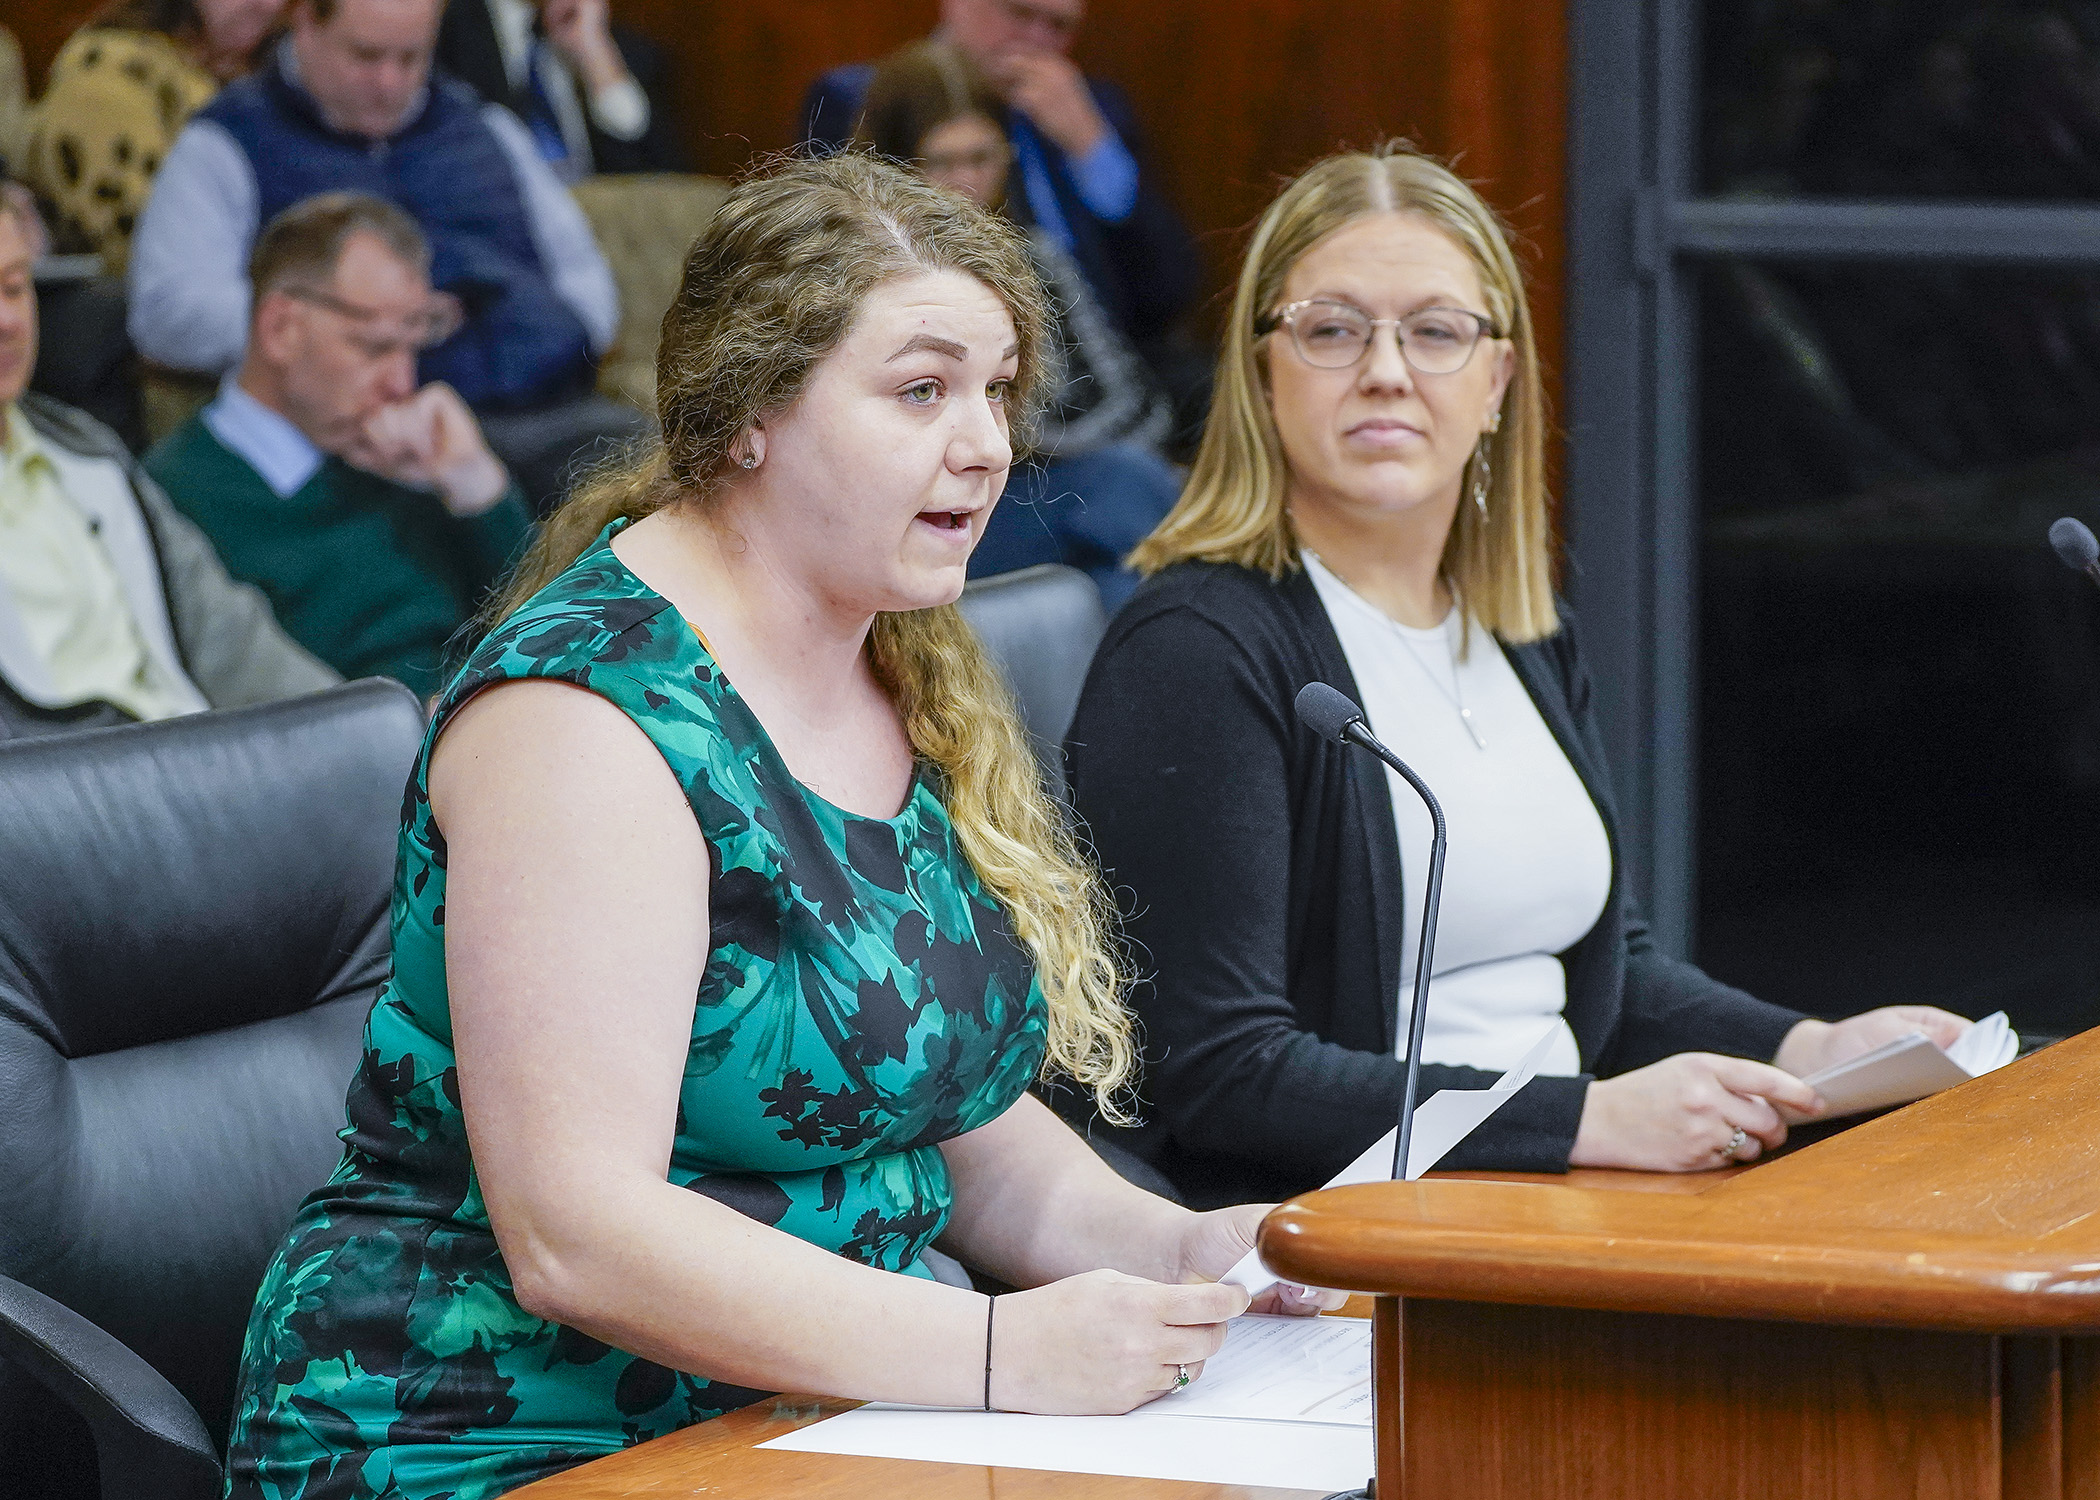 Kayla Fearing testifies before the House commerce committee in support of a bill sponsored by Rep. Jessica Hanson, right, to authorize patients enrolled in a registry program to cultivate up to 16 cannabis plants without a license. (Photo by Andrew VonBank)